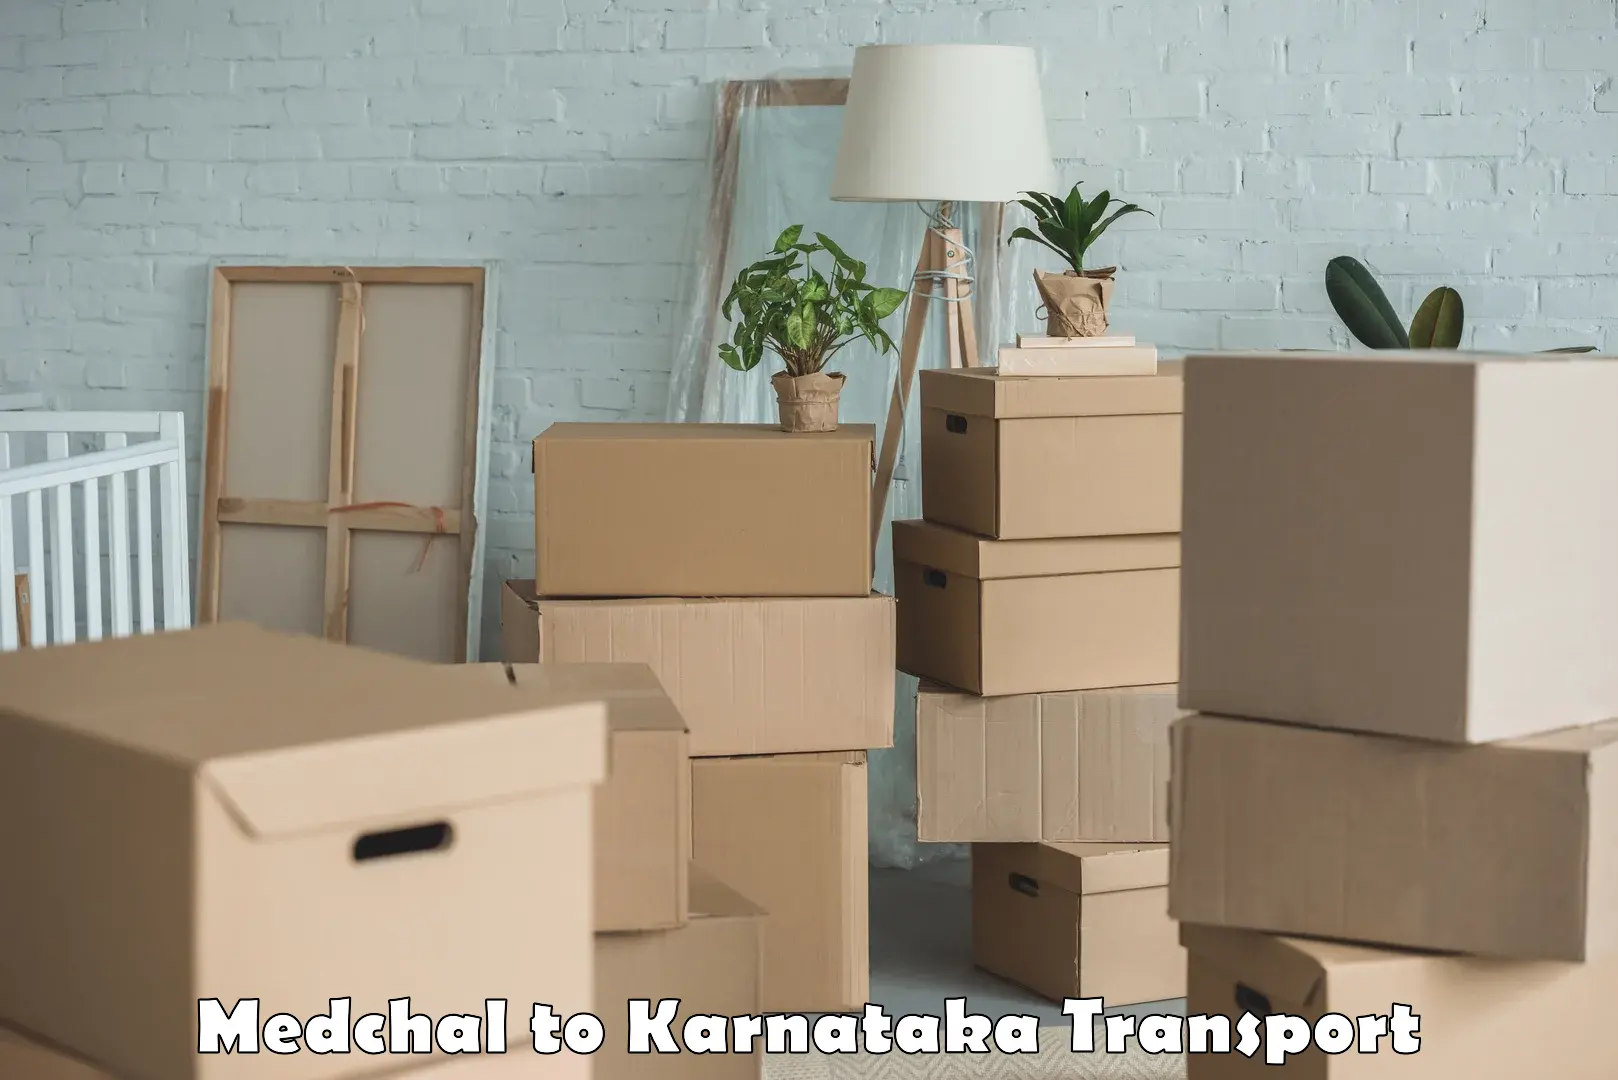 Parcel transport services Medchal to Bethamangala